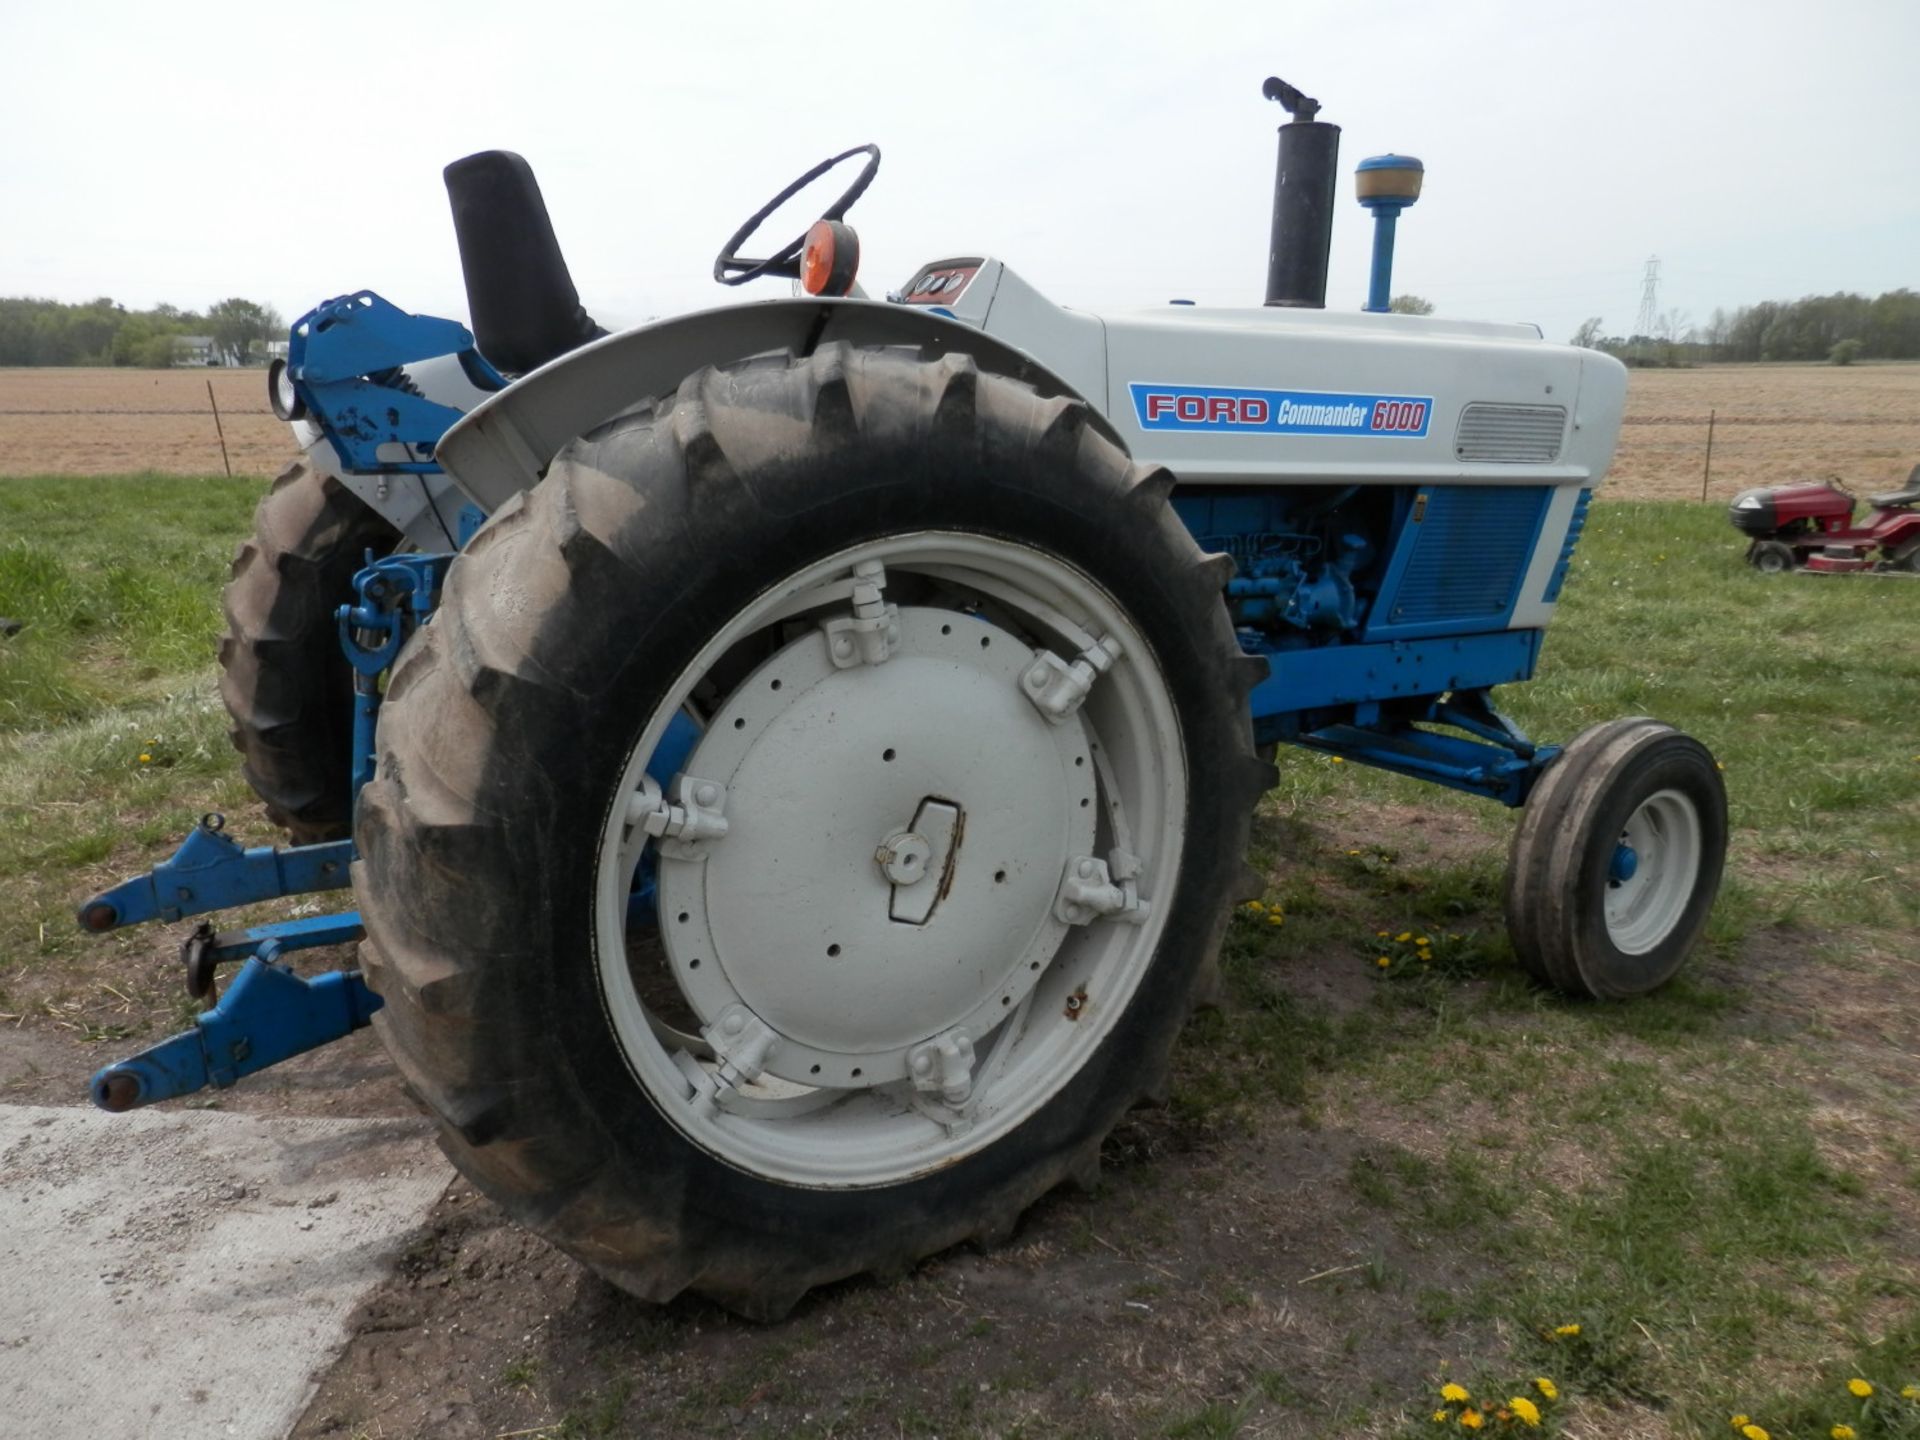 FORD 6000 COMMANDER DIESEL TRACTOR - Image 4 of 8